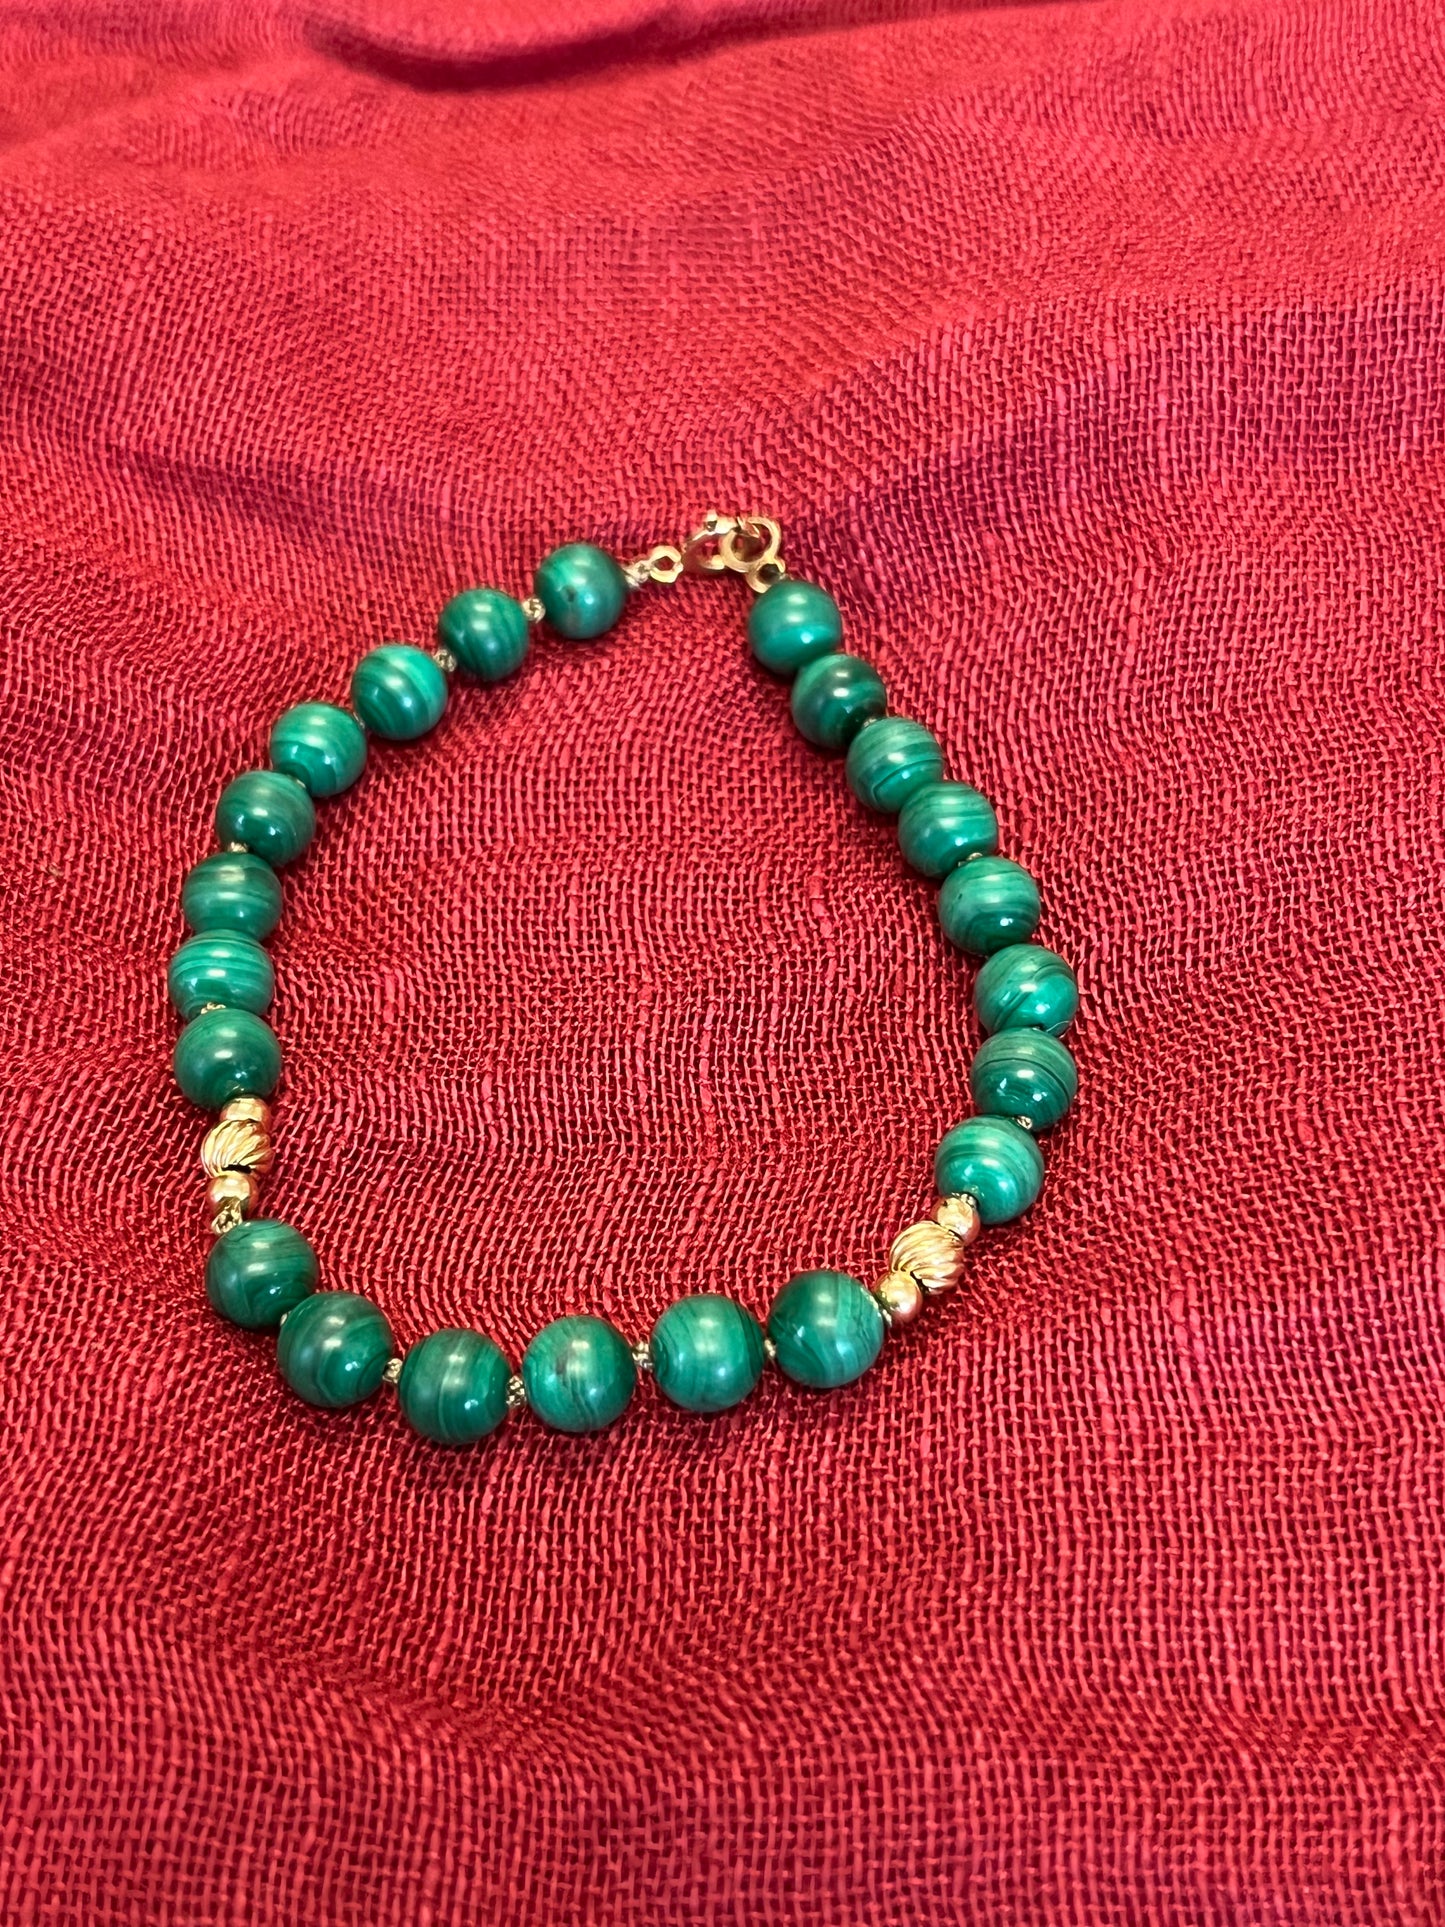 Set of Three (3) Green Gemstone Bracelets with Gold Accents